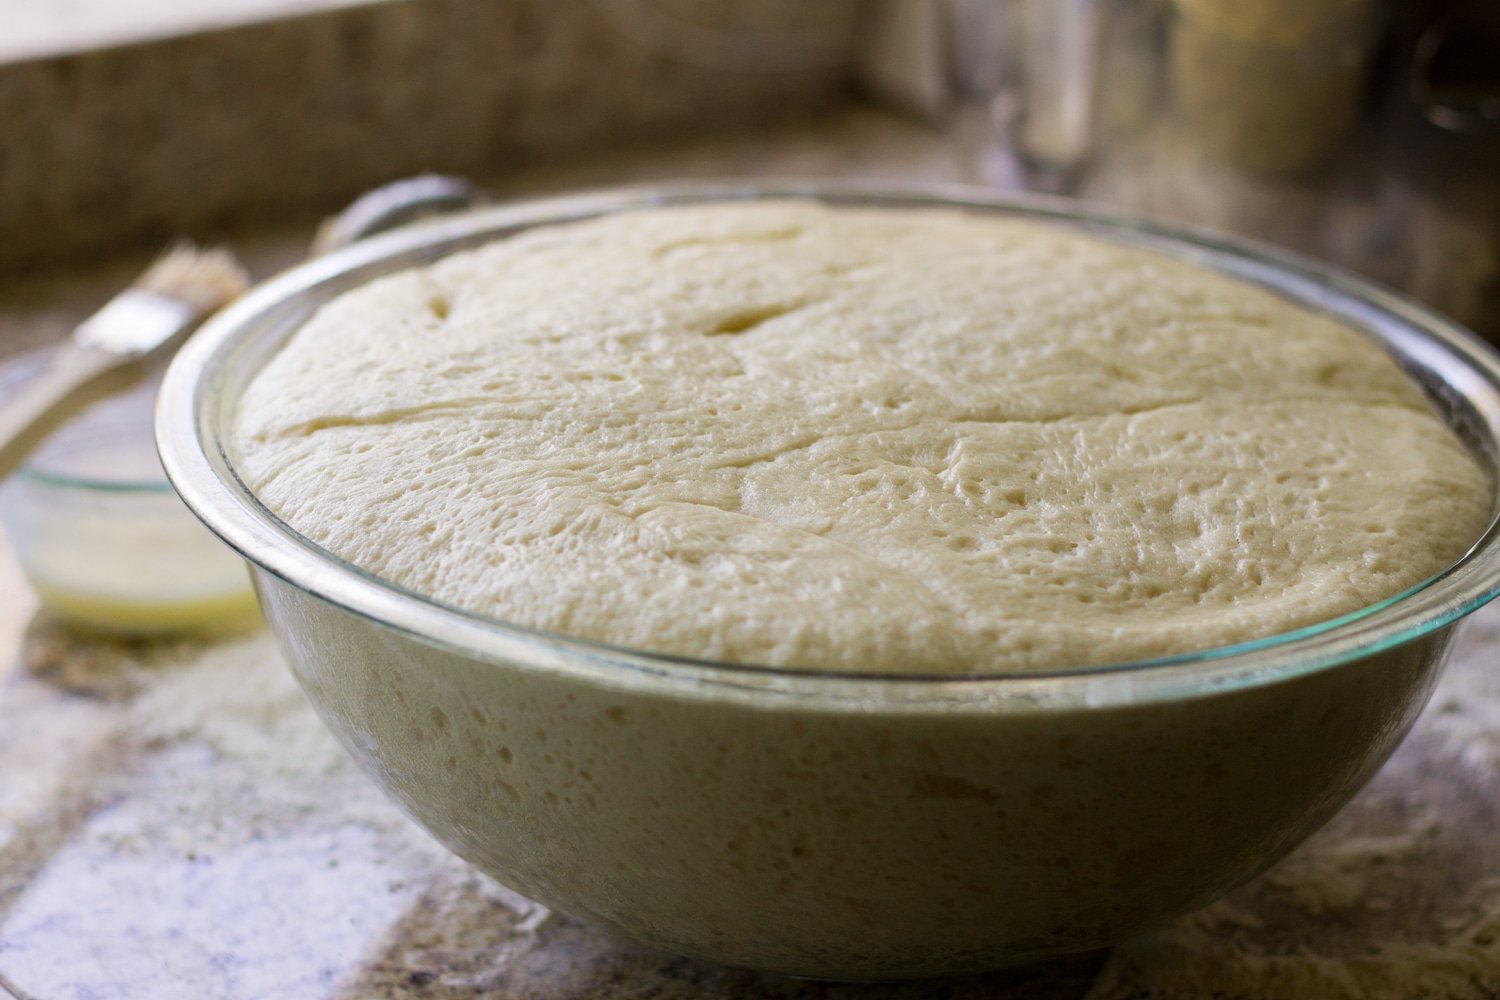 Dough in a bowl after proofing.